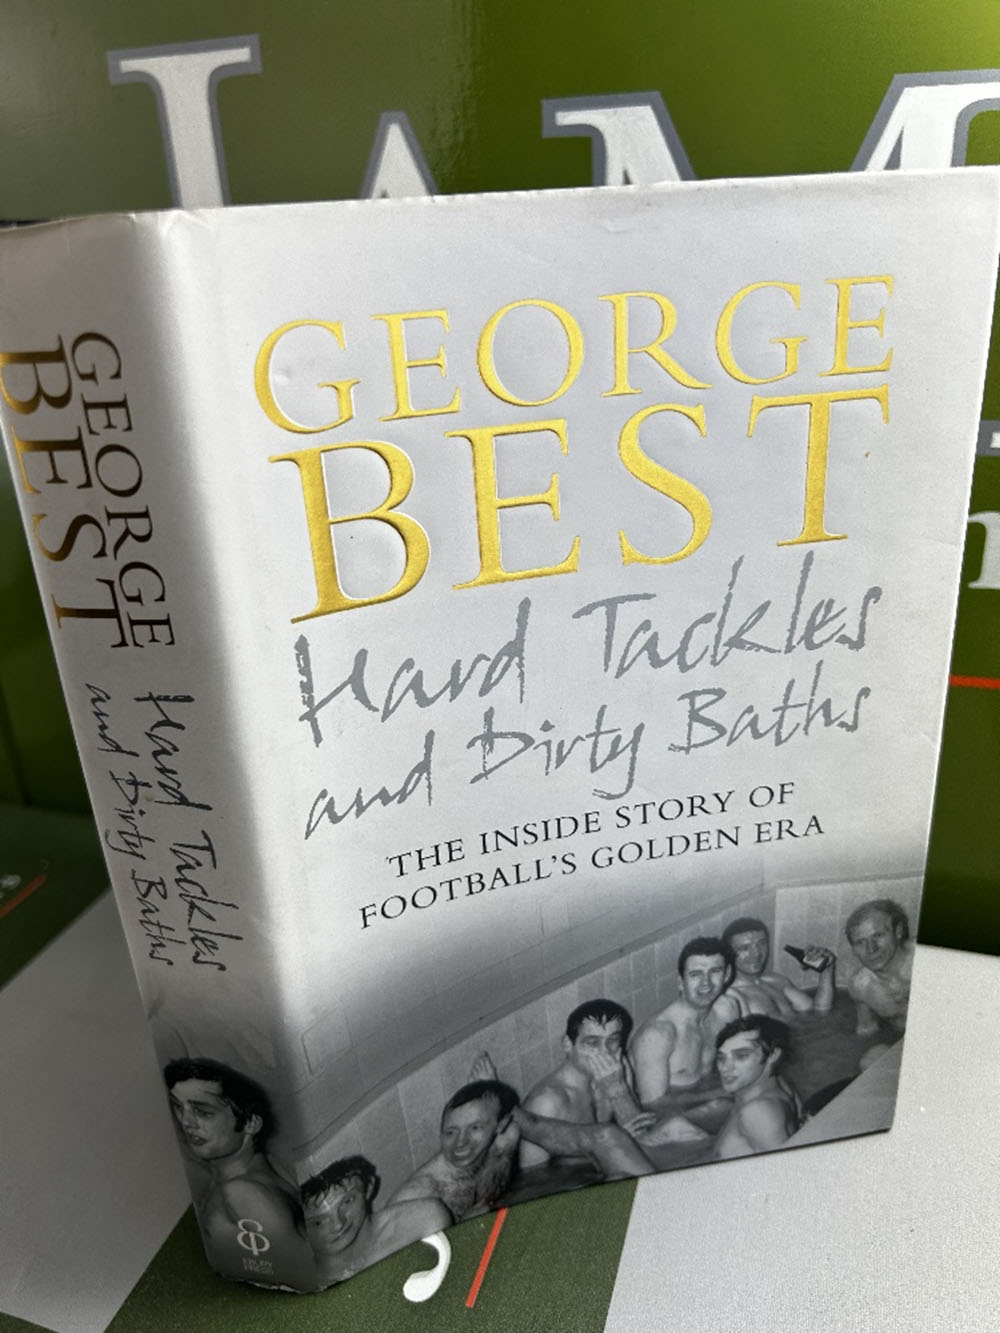 Signed George Best Book Hard Tackles & Dirty Baths - Image 3 of 7